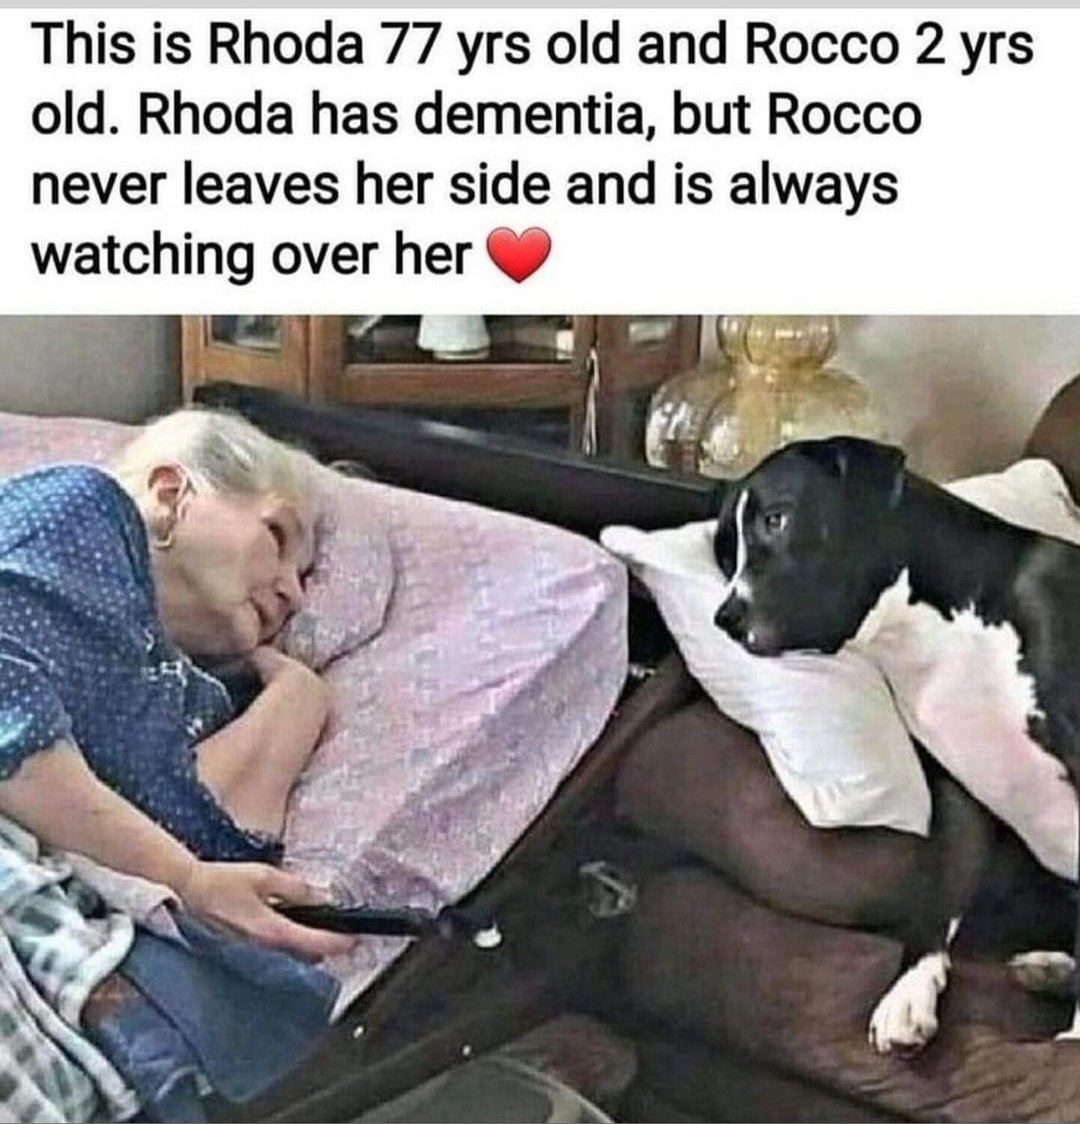 This is heartwarming and beautiful 🥹🥰

#dogs #pets #animallove #animals #companion  #dementia